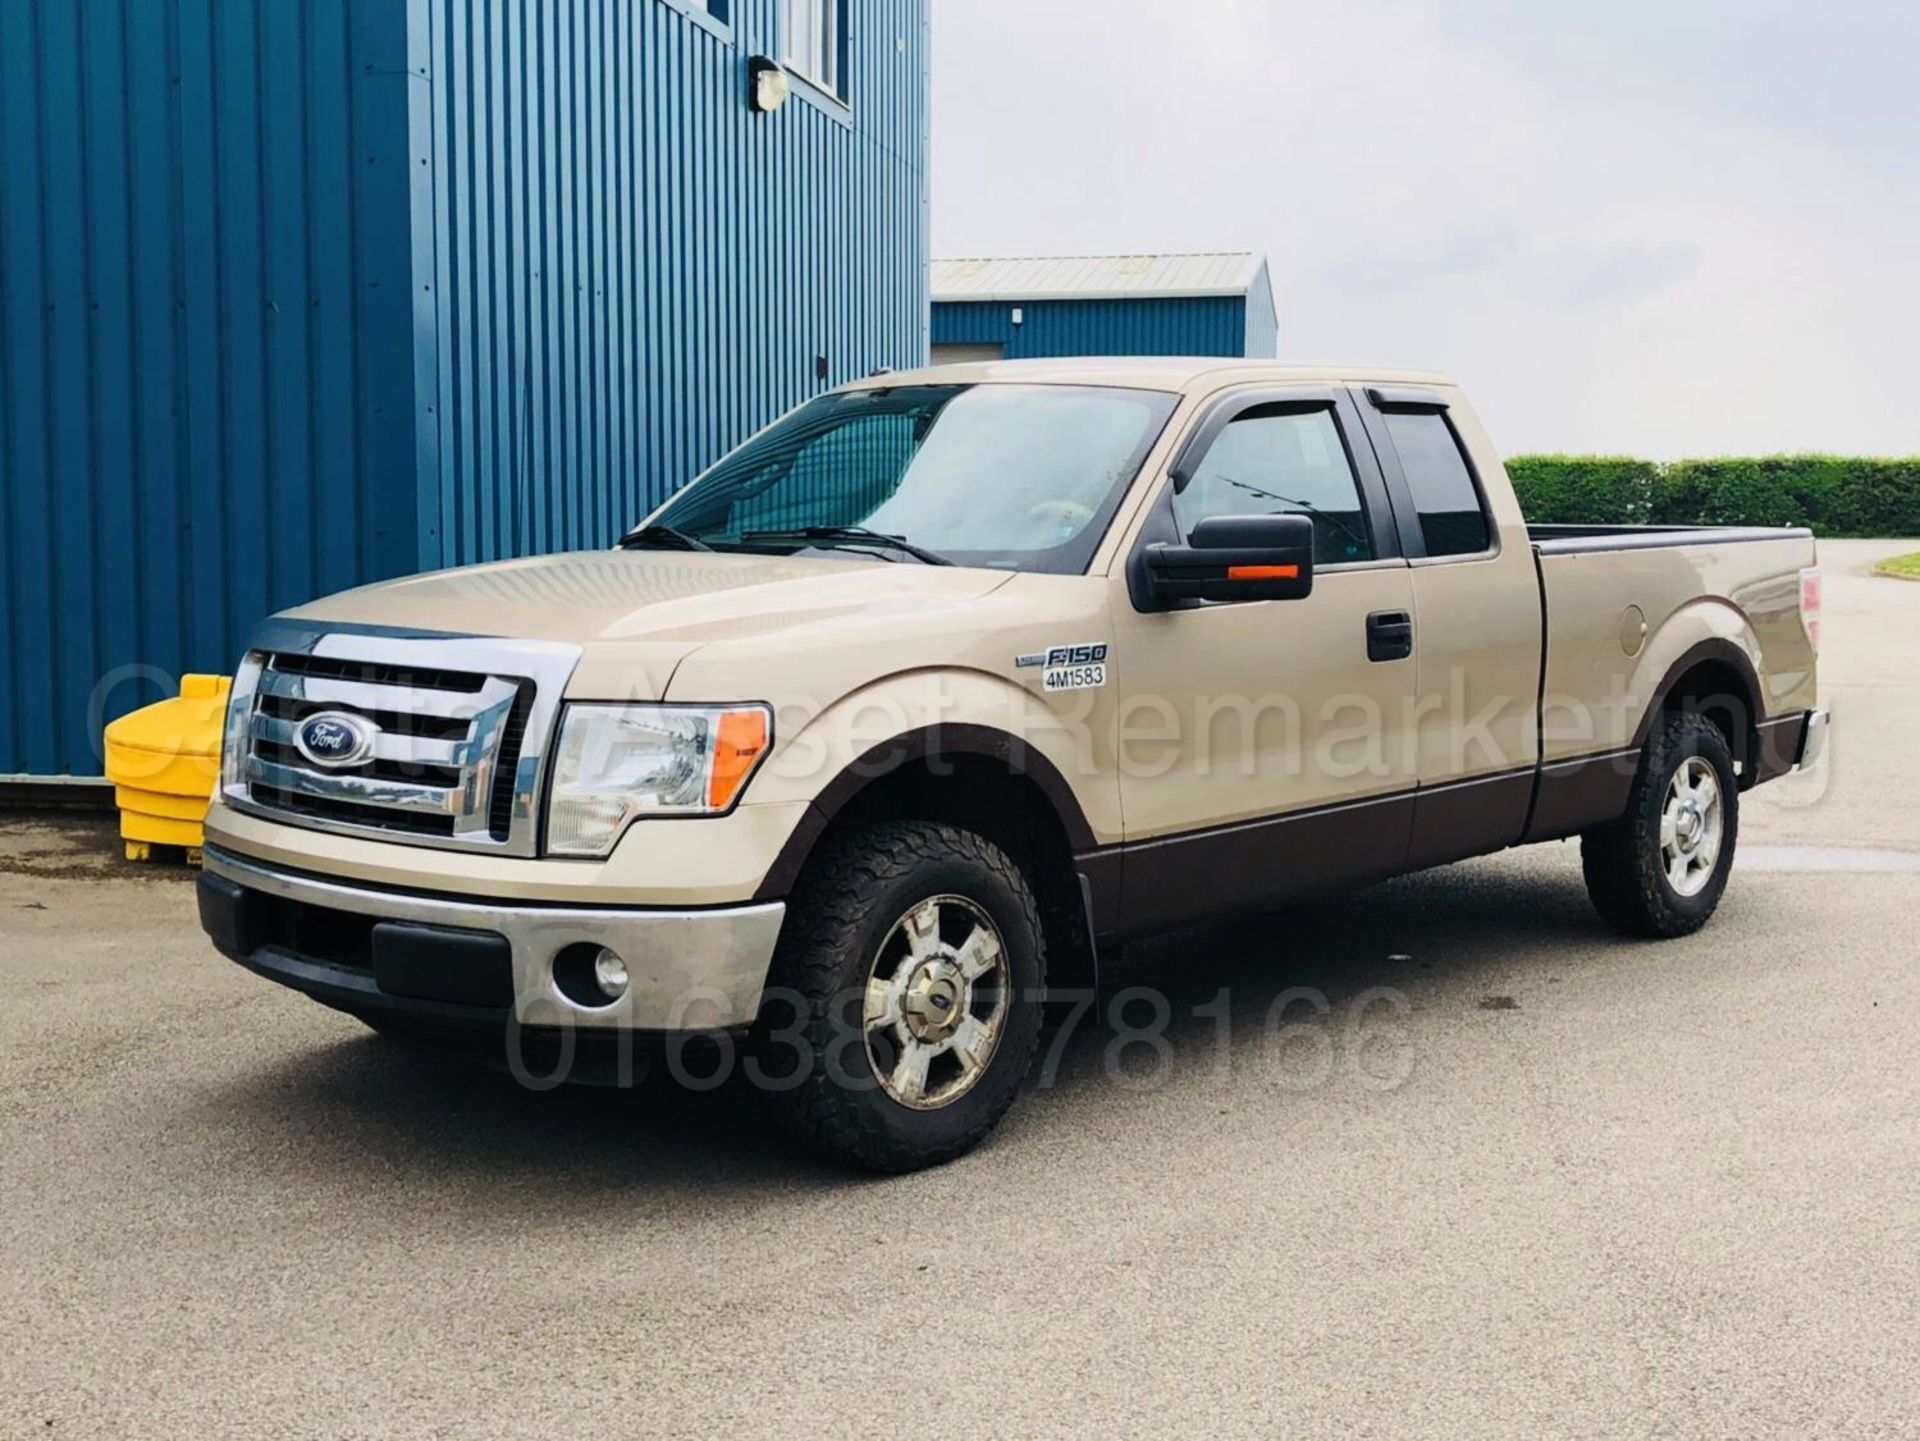 (ON SALE) FORD F-150 'XLT EDITION' KING CAB (2012 MODEL) '5.0 V8 - COLUM GEARBOX' **MASSIVE SPEC**